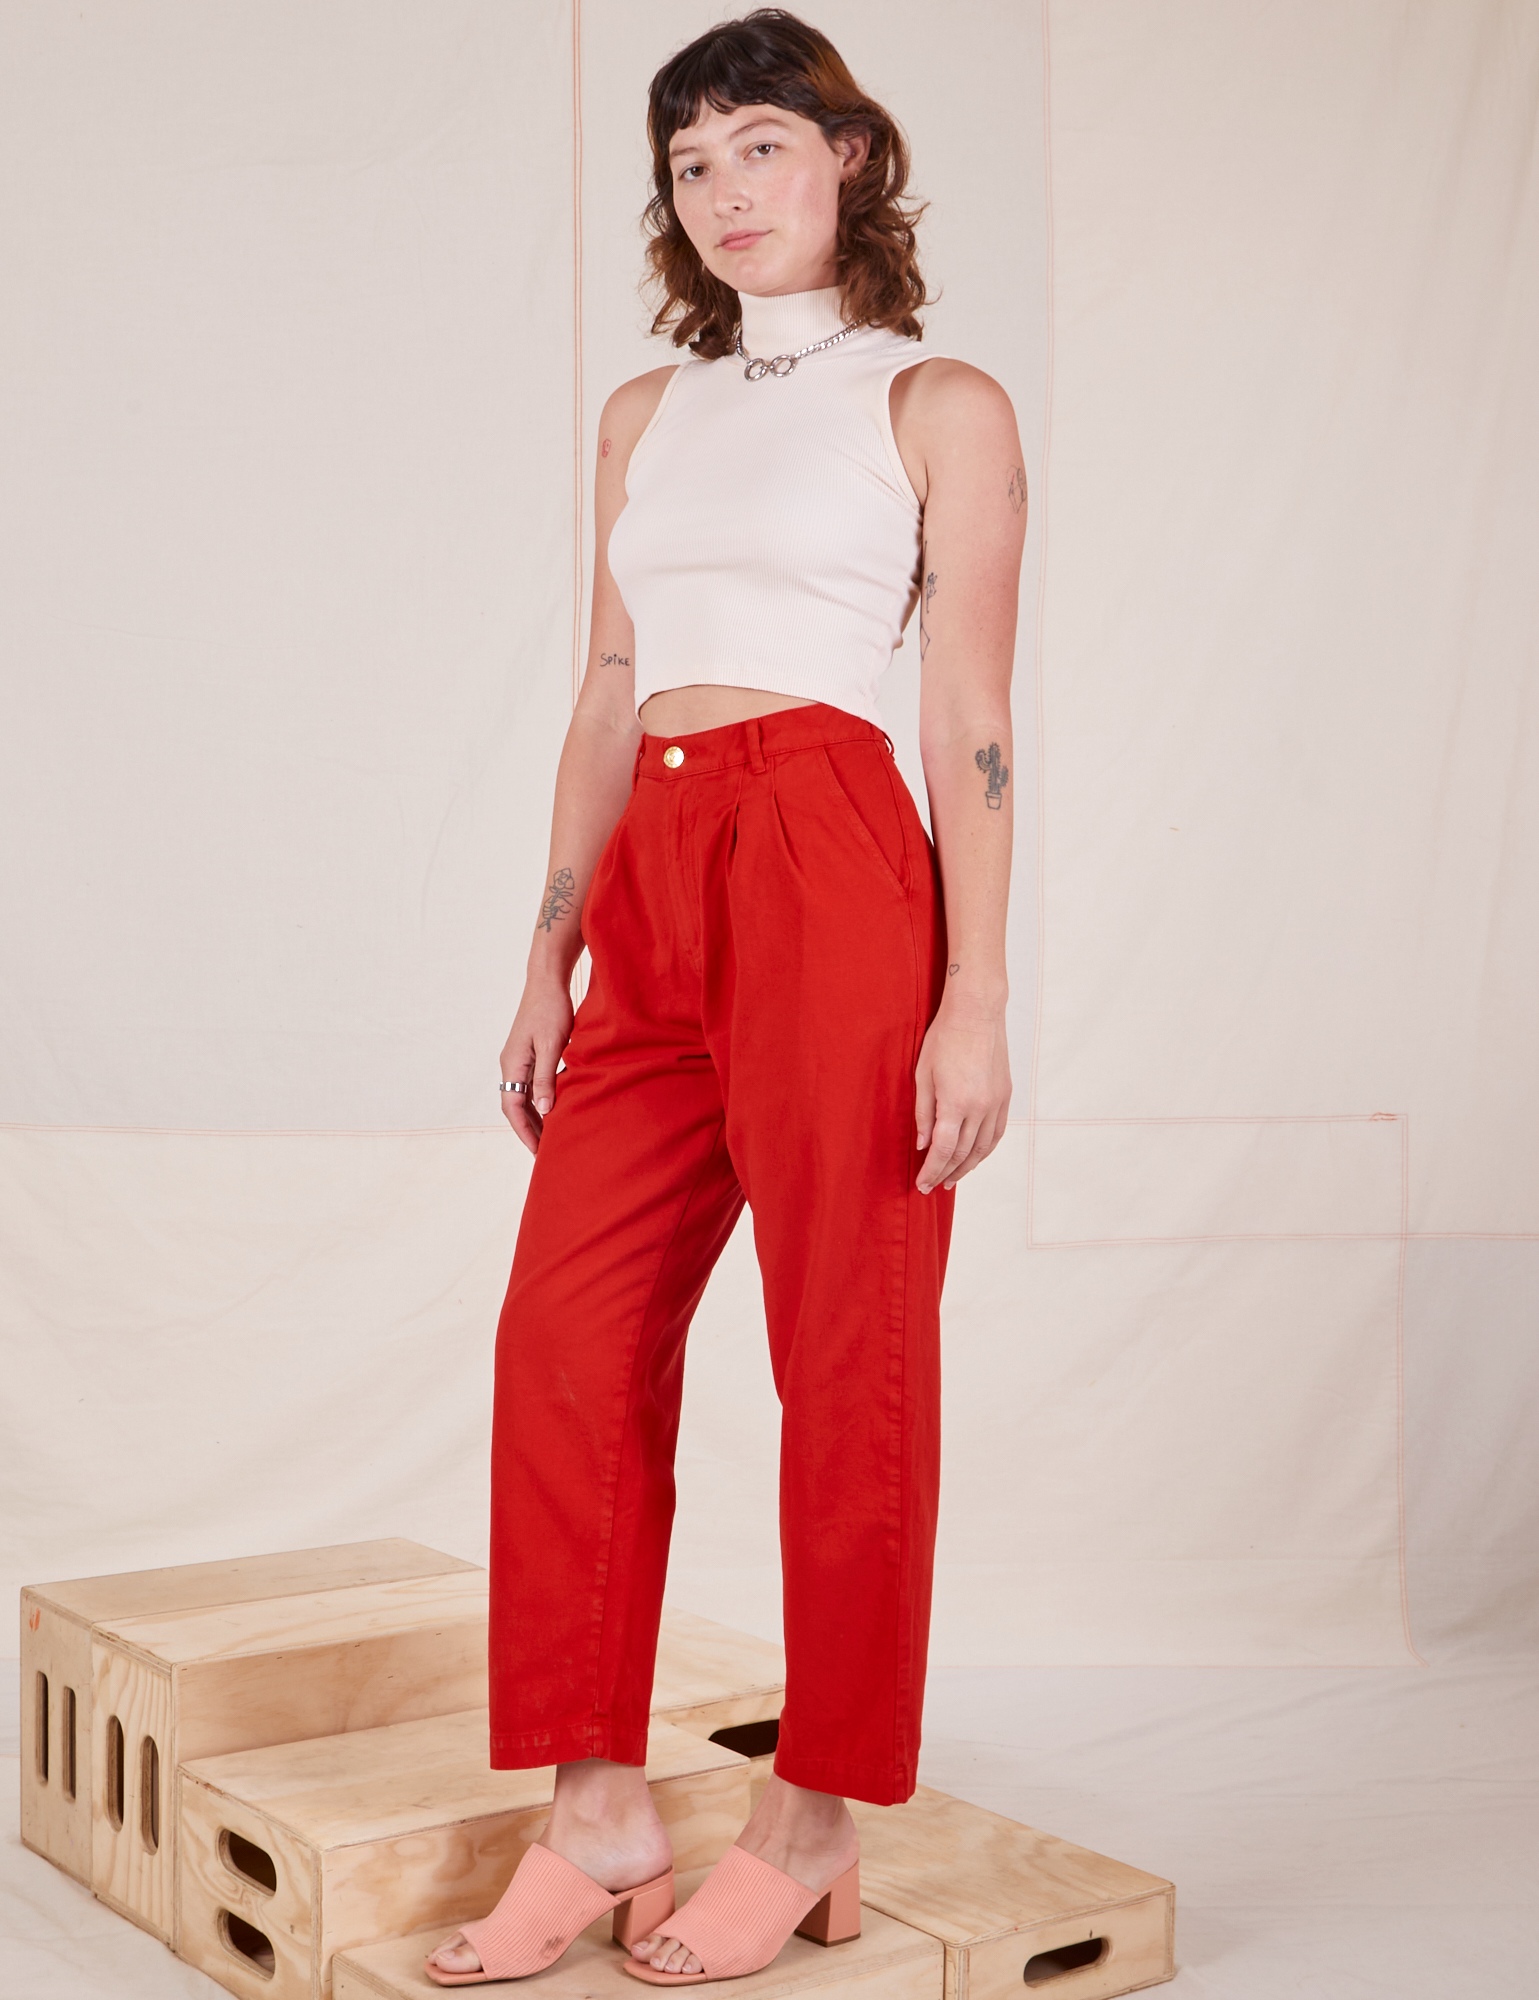 Alex is 5&#39;8&quot; and wearing XXS Heavyweight Trousers in Mustang Red paired with vintage off-white Sleeveless Turtleneck